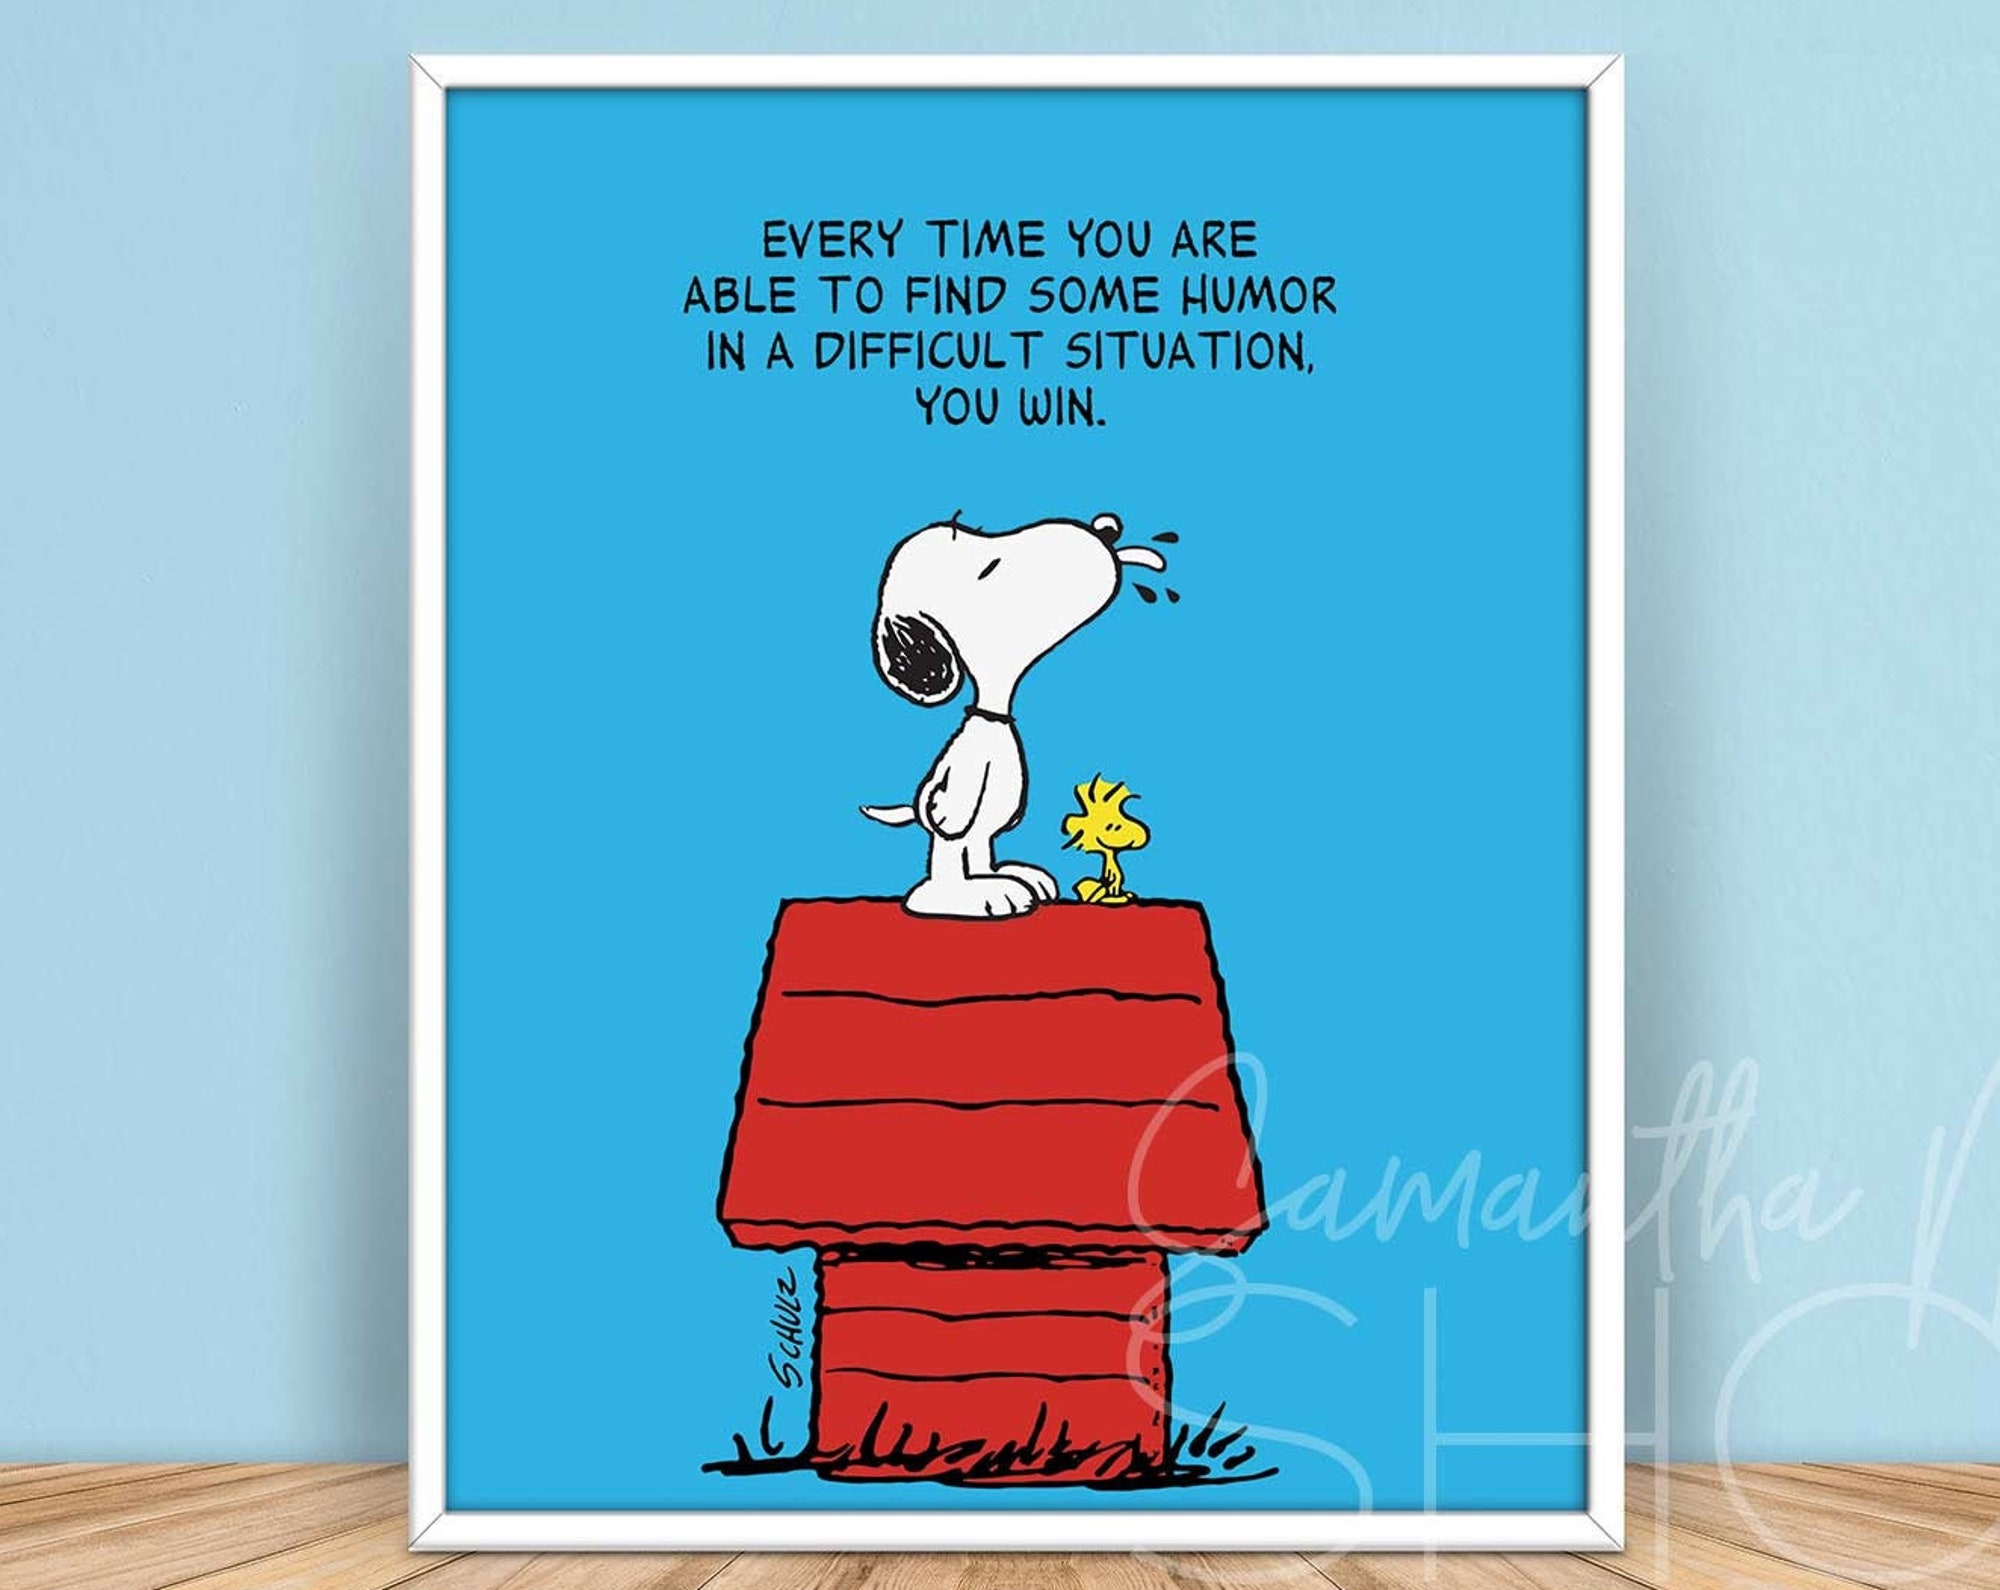 Every time you are able to find some humor in a difficult situation, you win. Snoopy and Woodstock poster